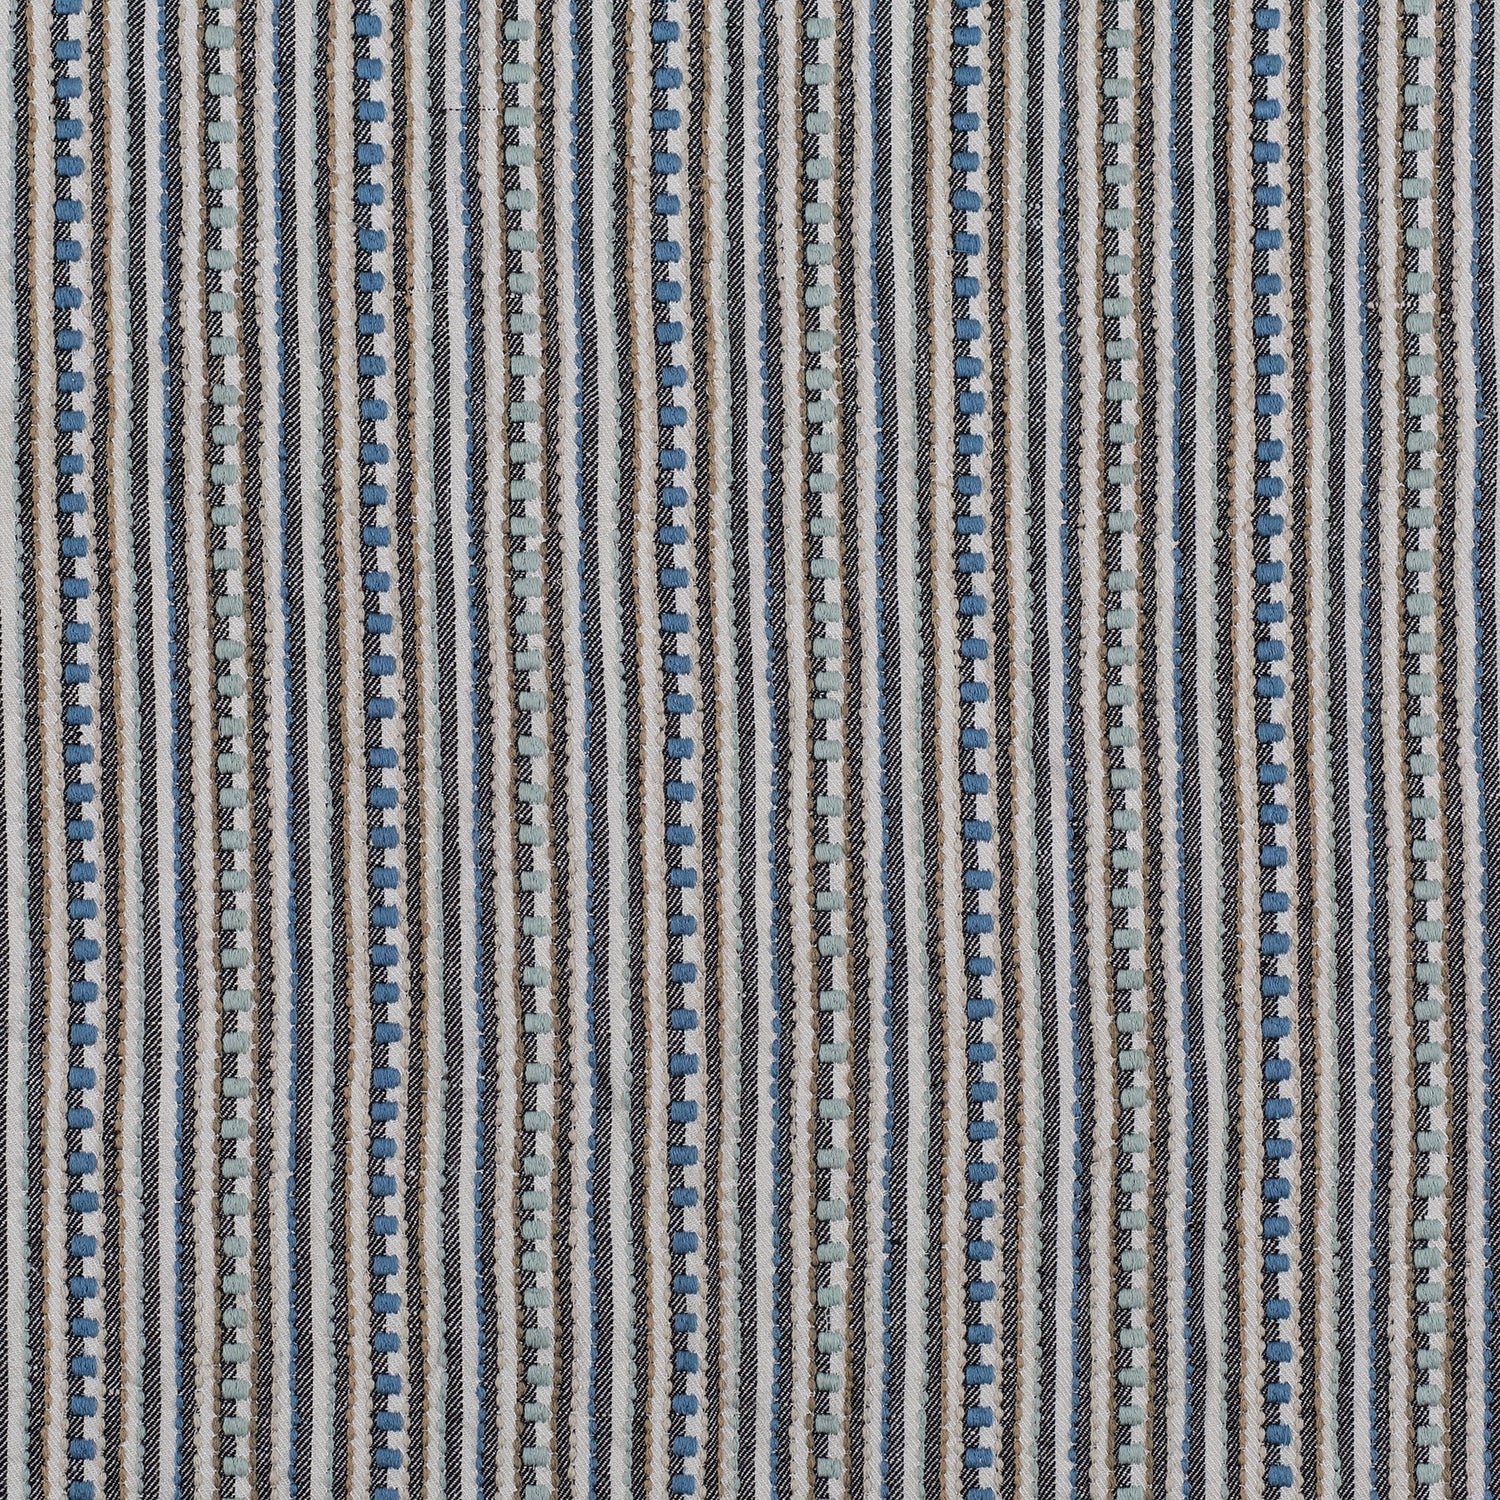 Dimensional embroidered fabric in an irregular stripe pattern in shades of blue, grey and tan.